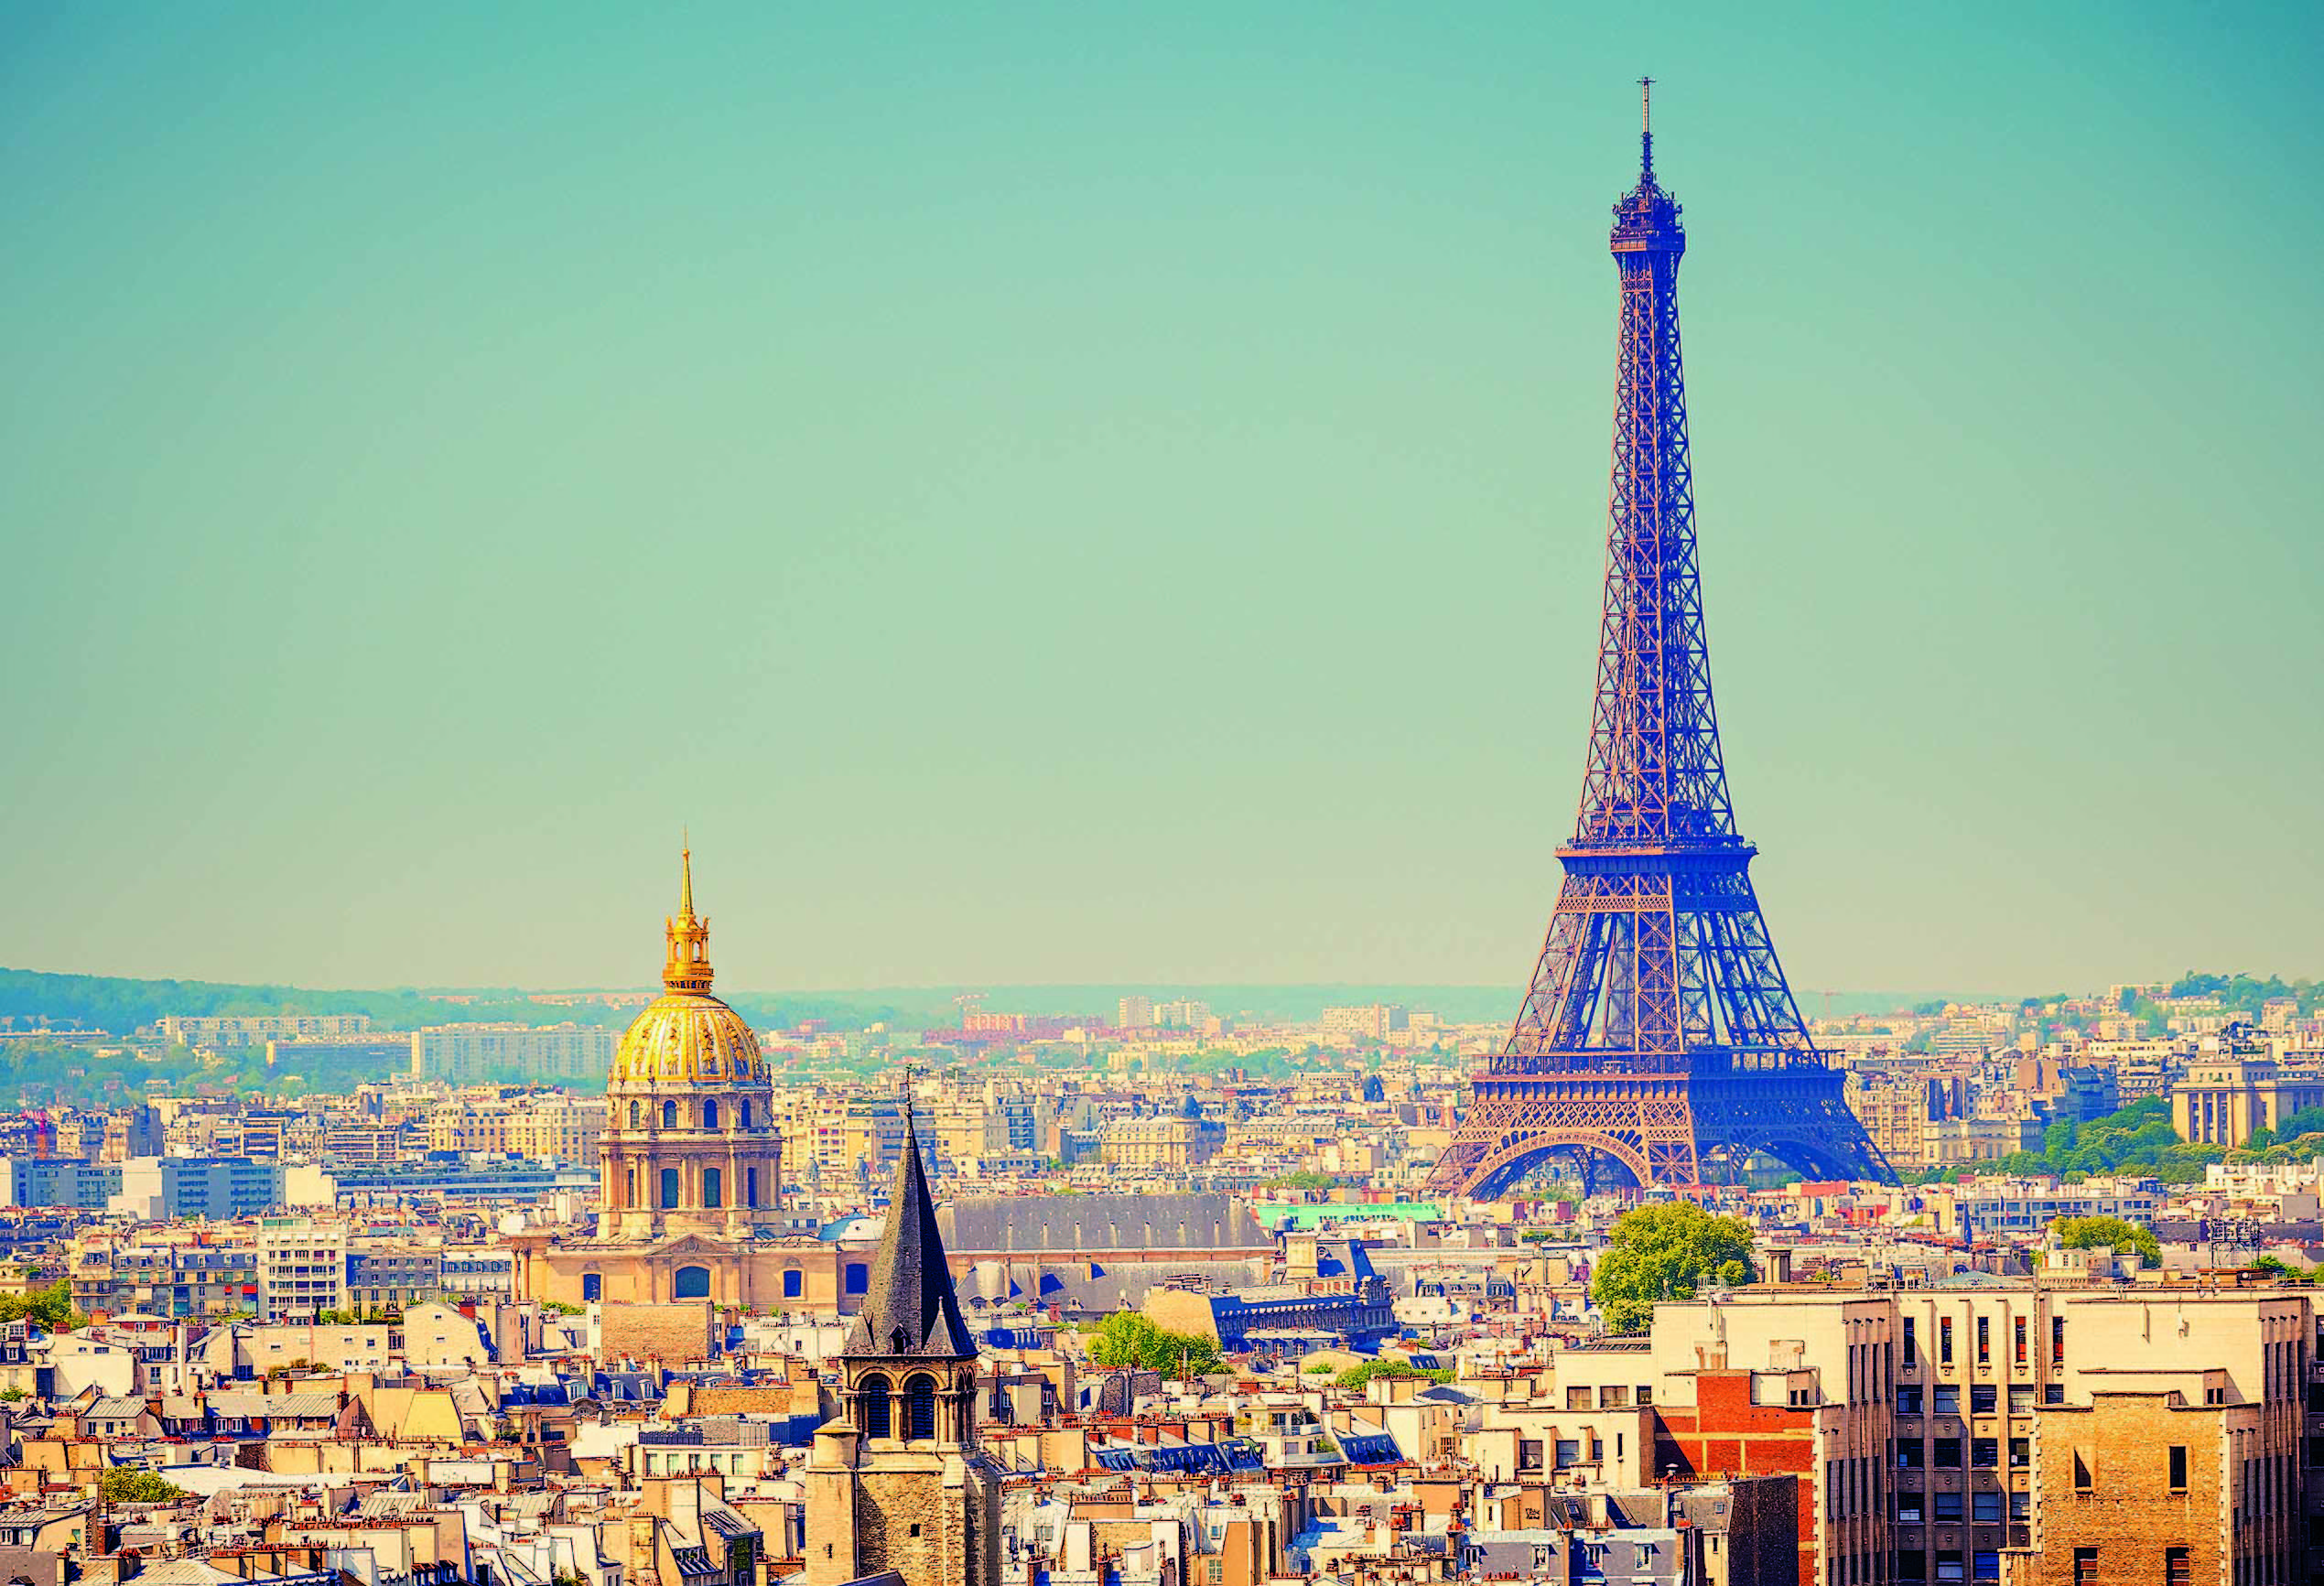 Eiffel Tower In Paris France Wallpaper And Image